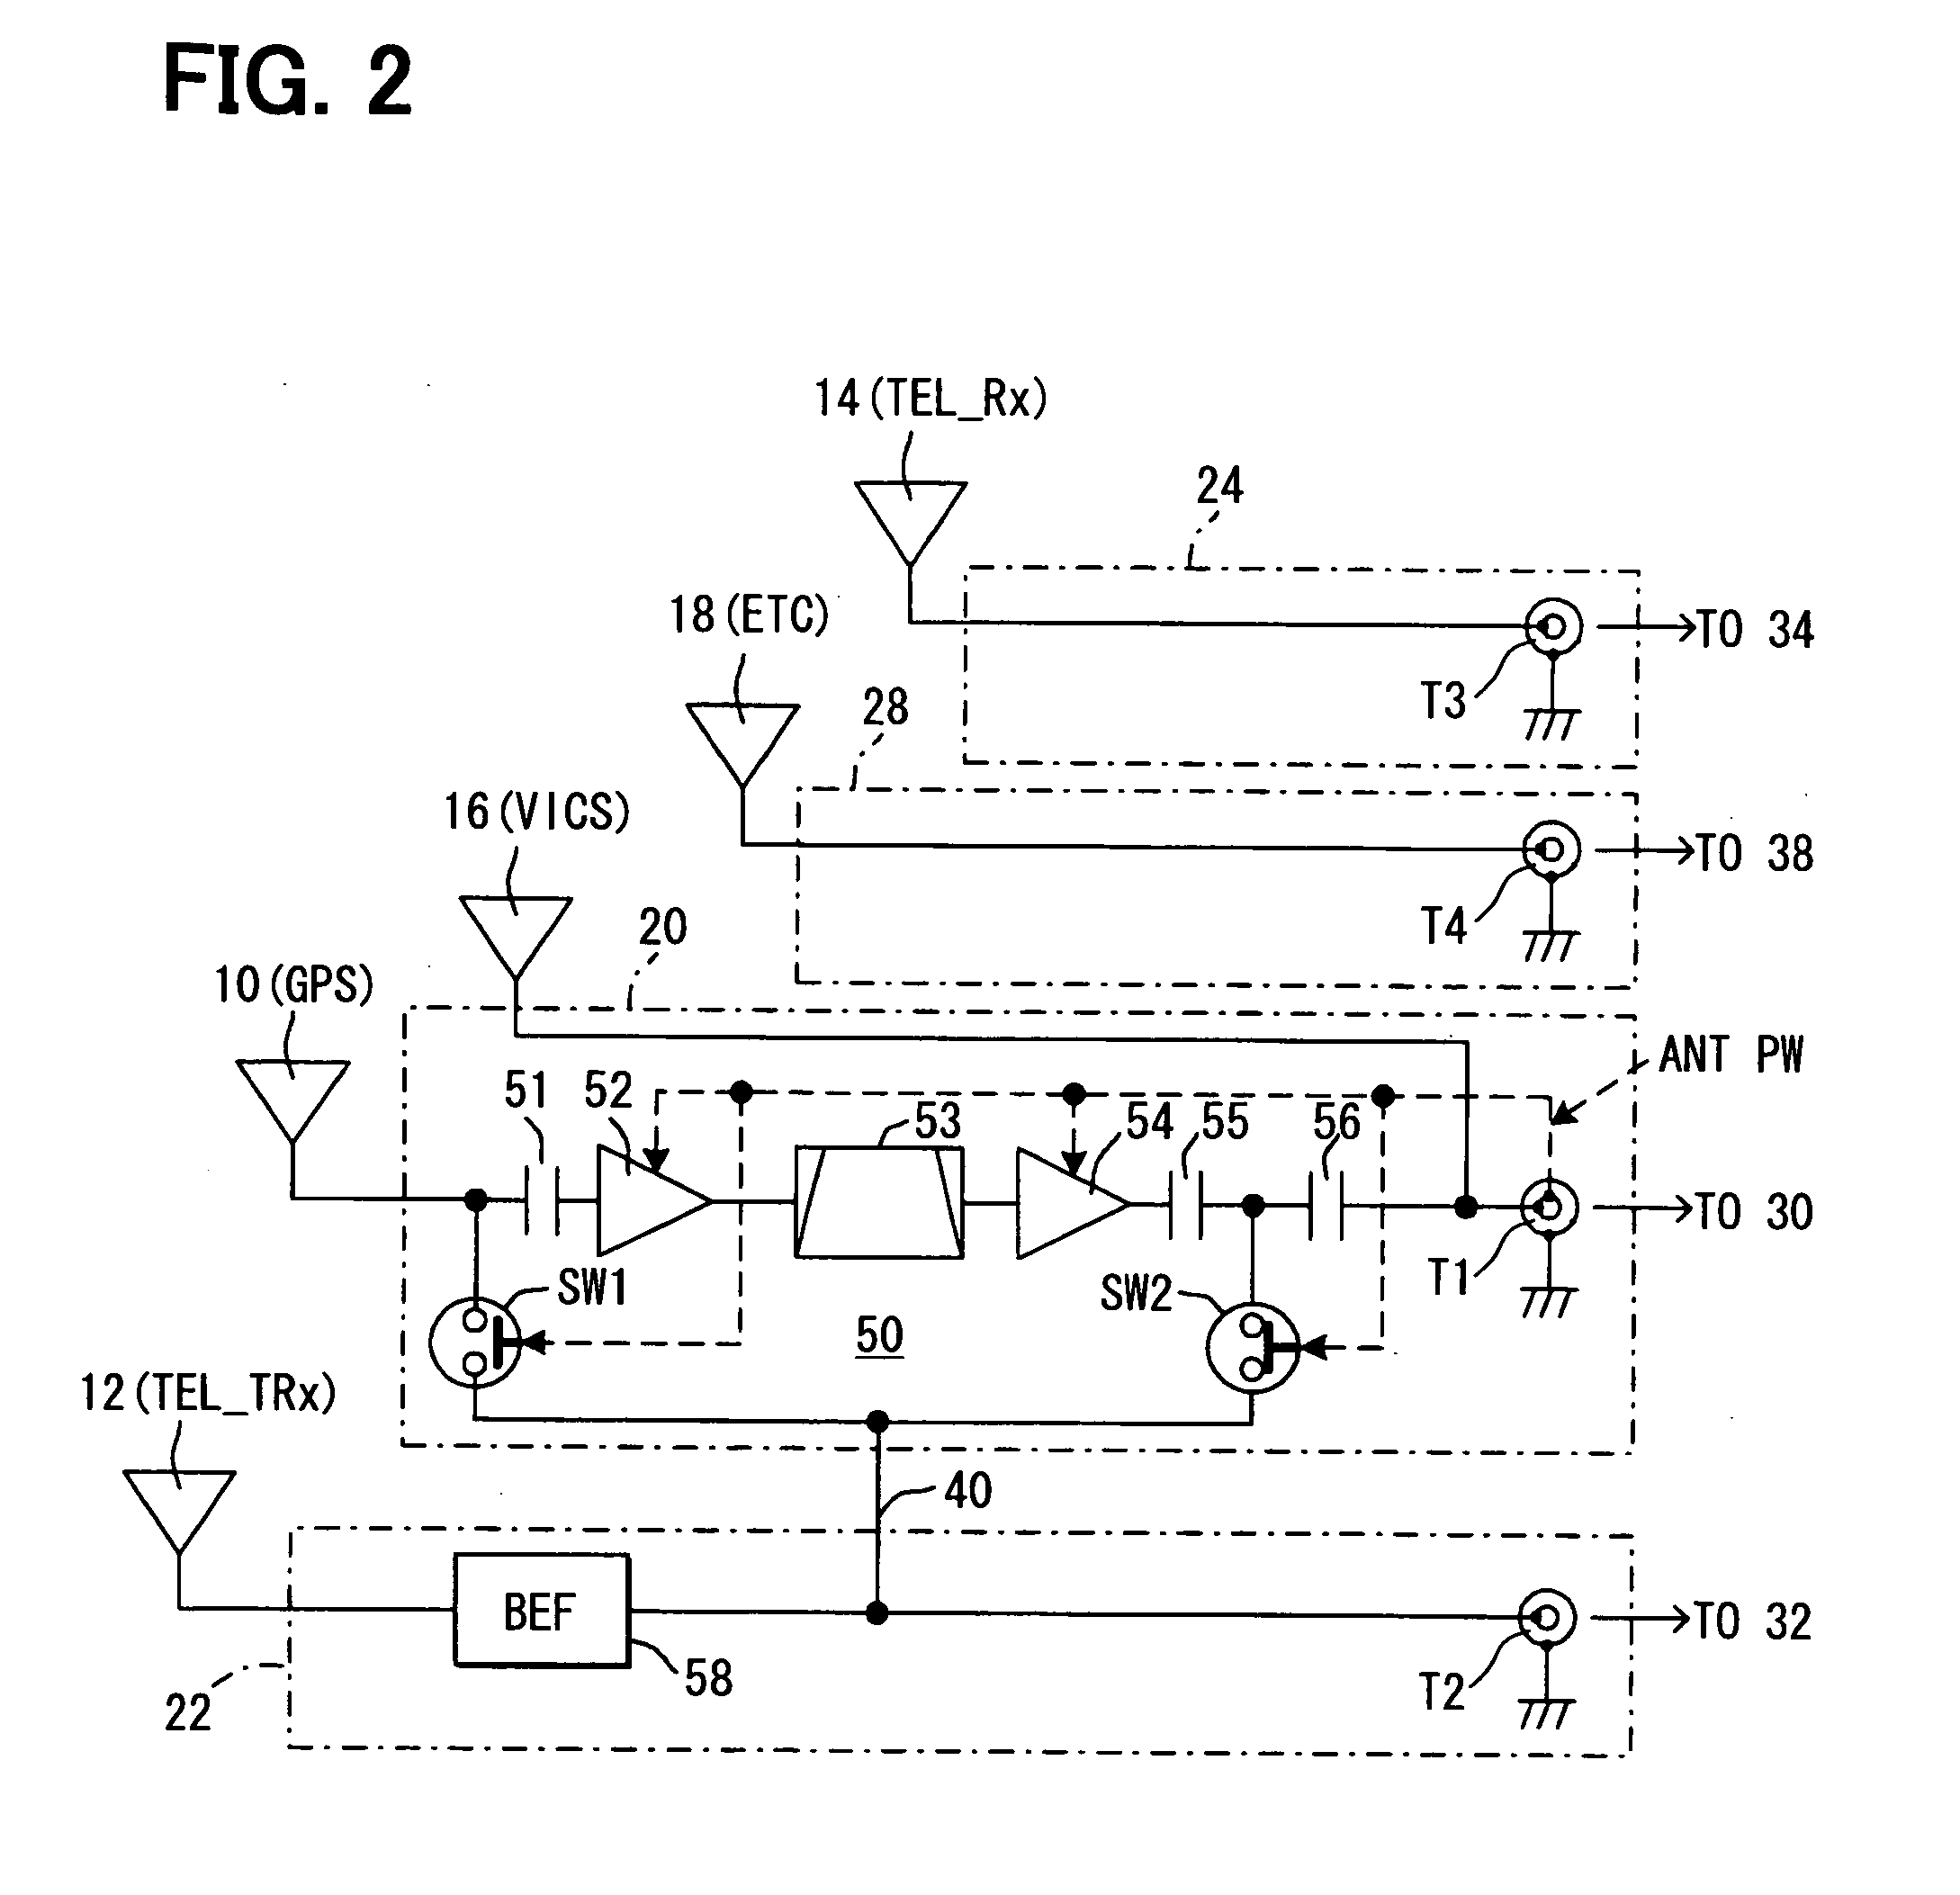 Antenna device for use in vehicle